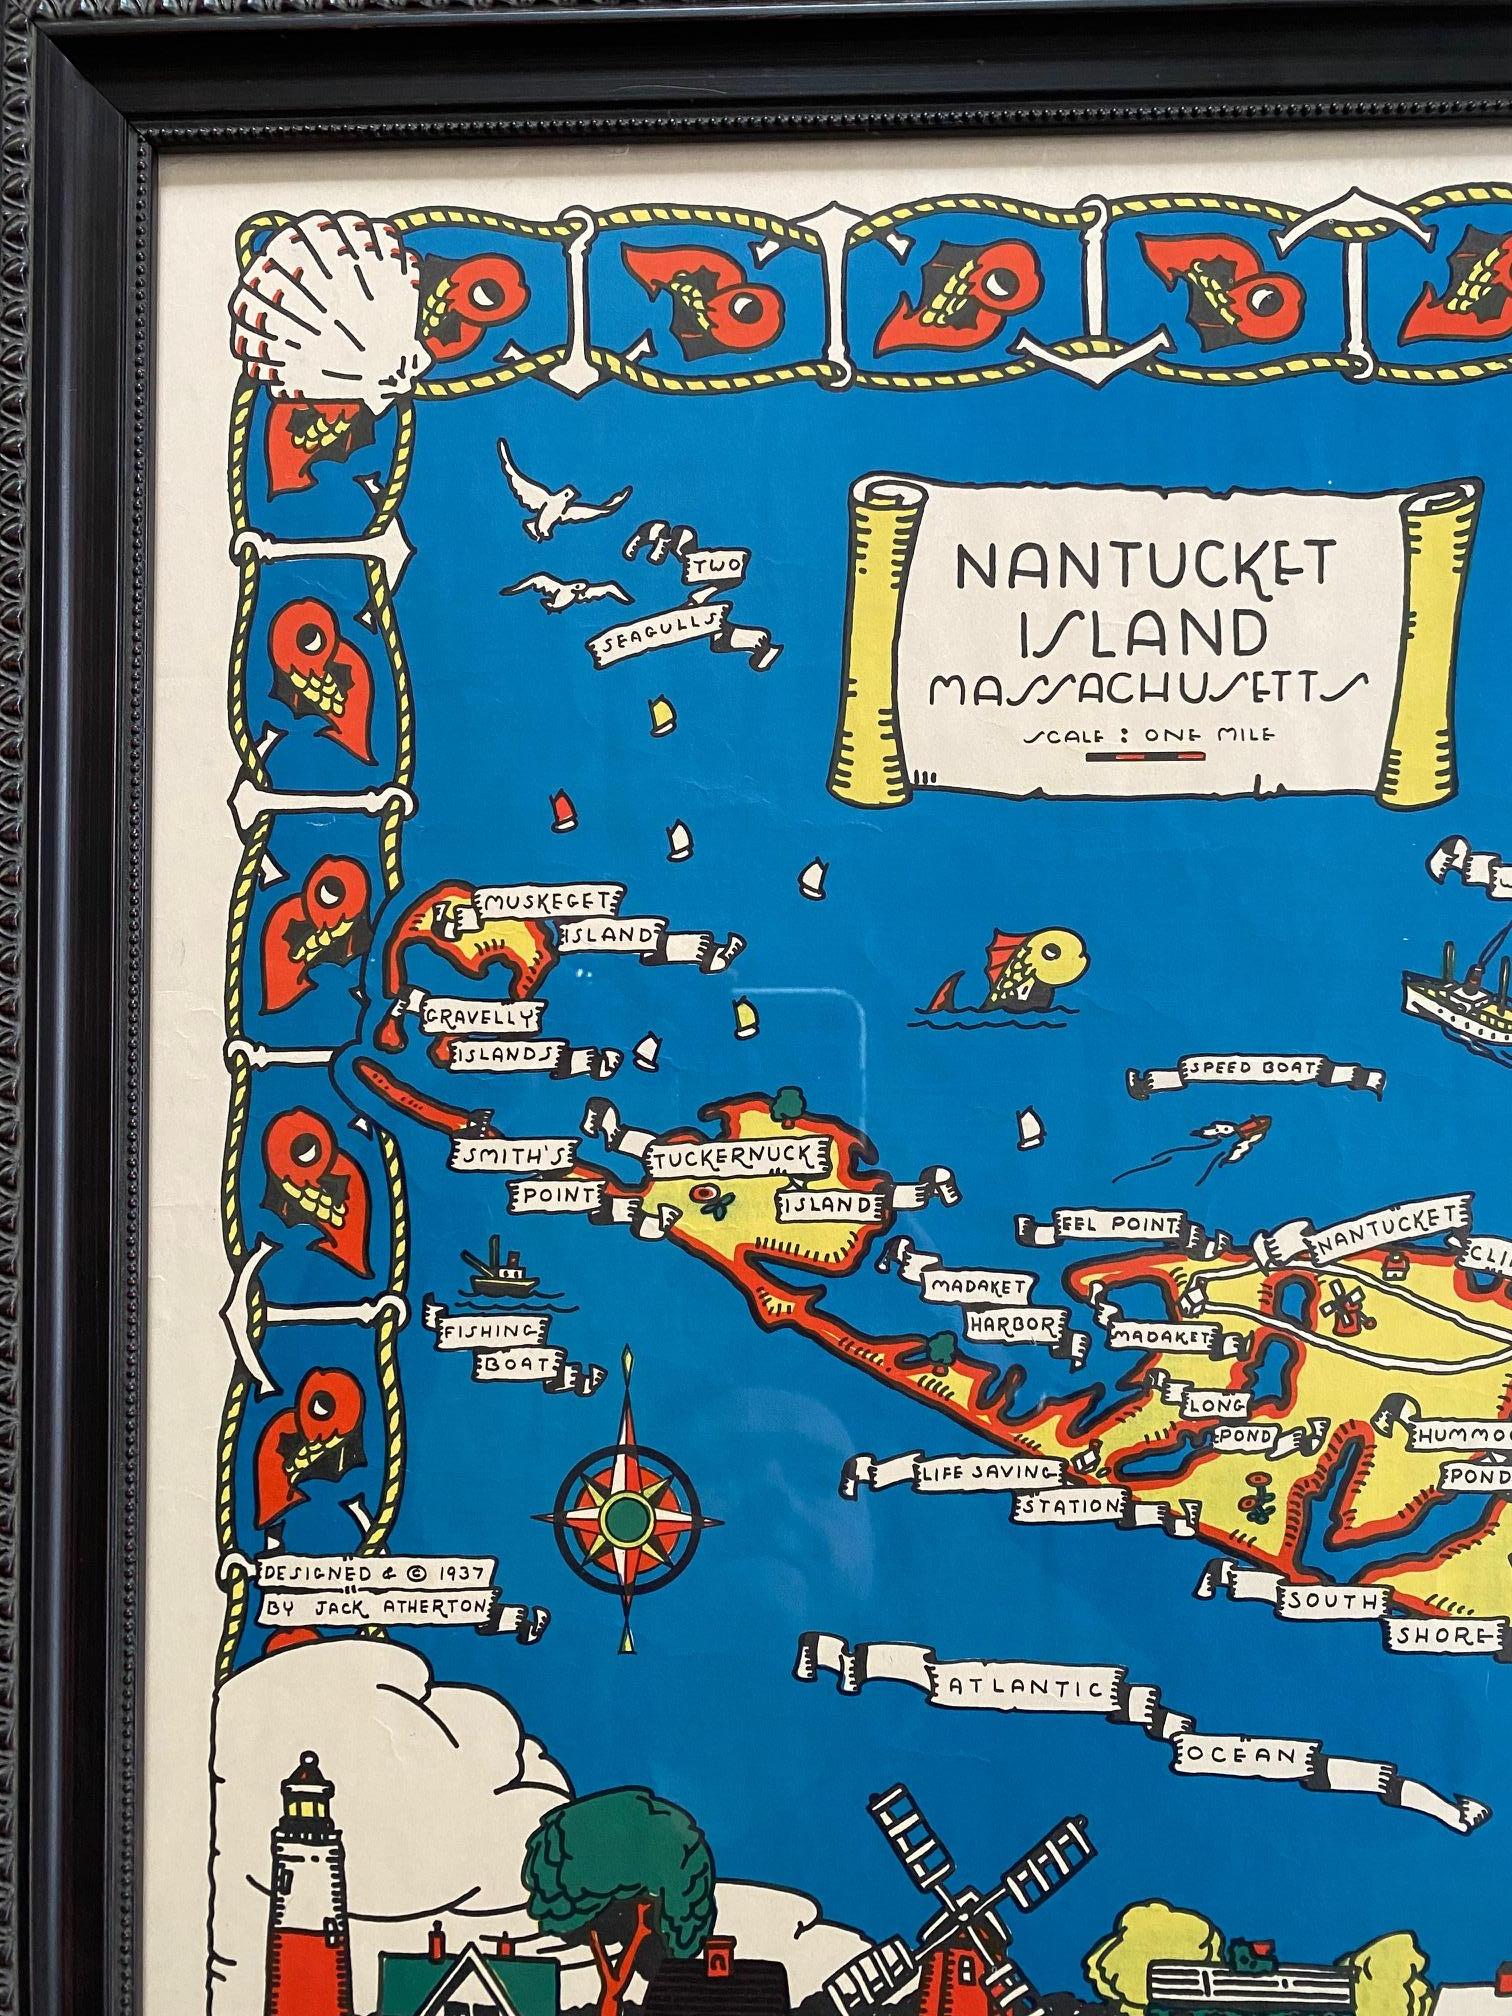 A wonderful vintage pictorial map of Nantucket Island, by Jack Atherton, 1937, simple and whimsical, showing the general lay of the land and featuring the main roads and place names, the border lined with iconic buildings and lighthouses. The water